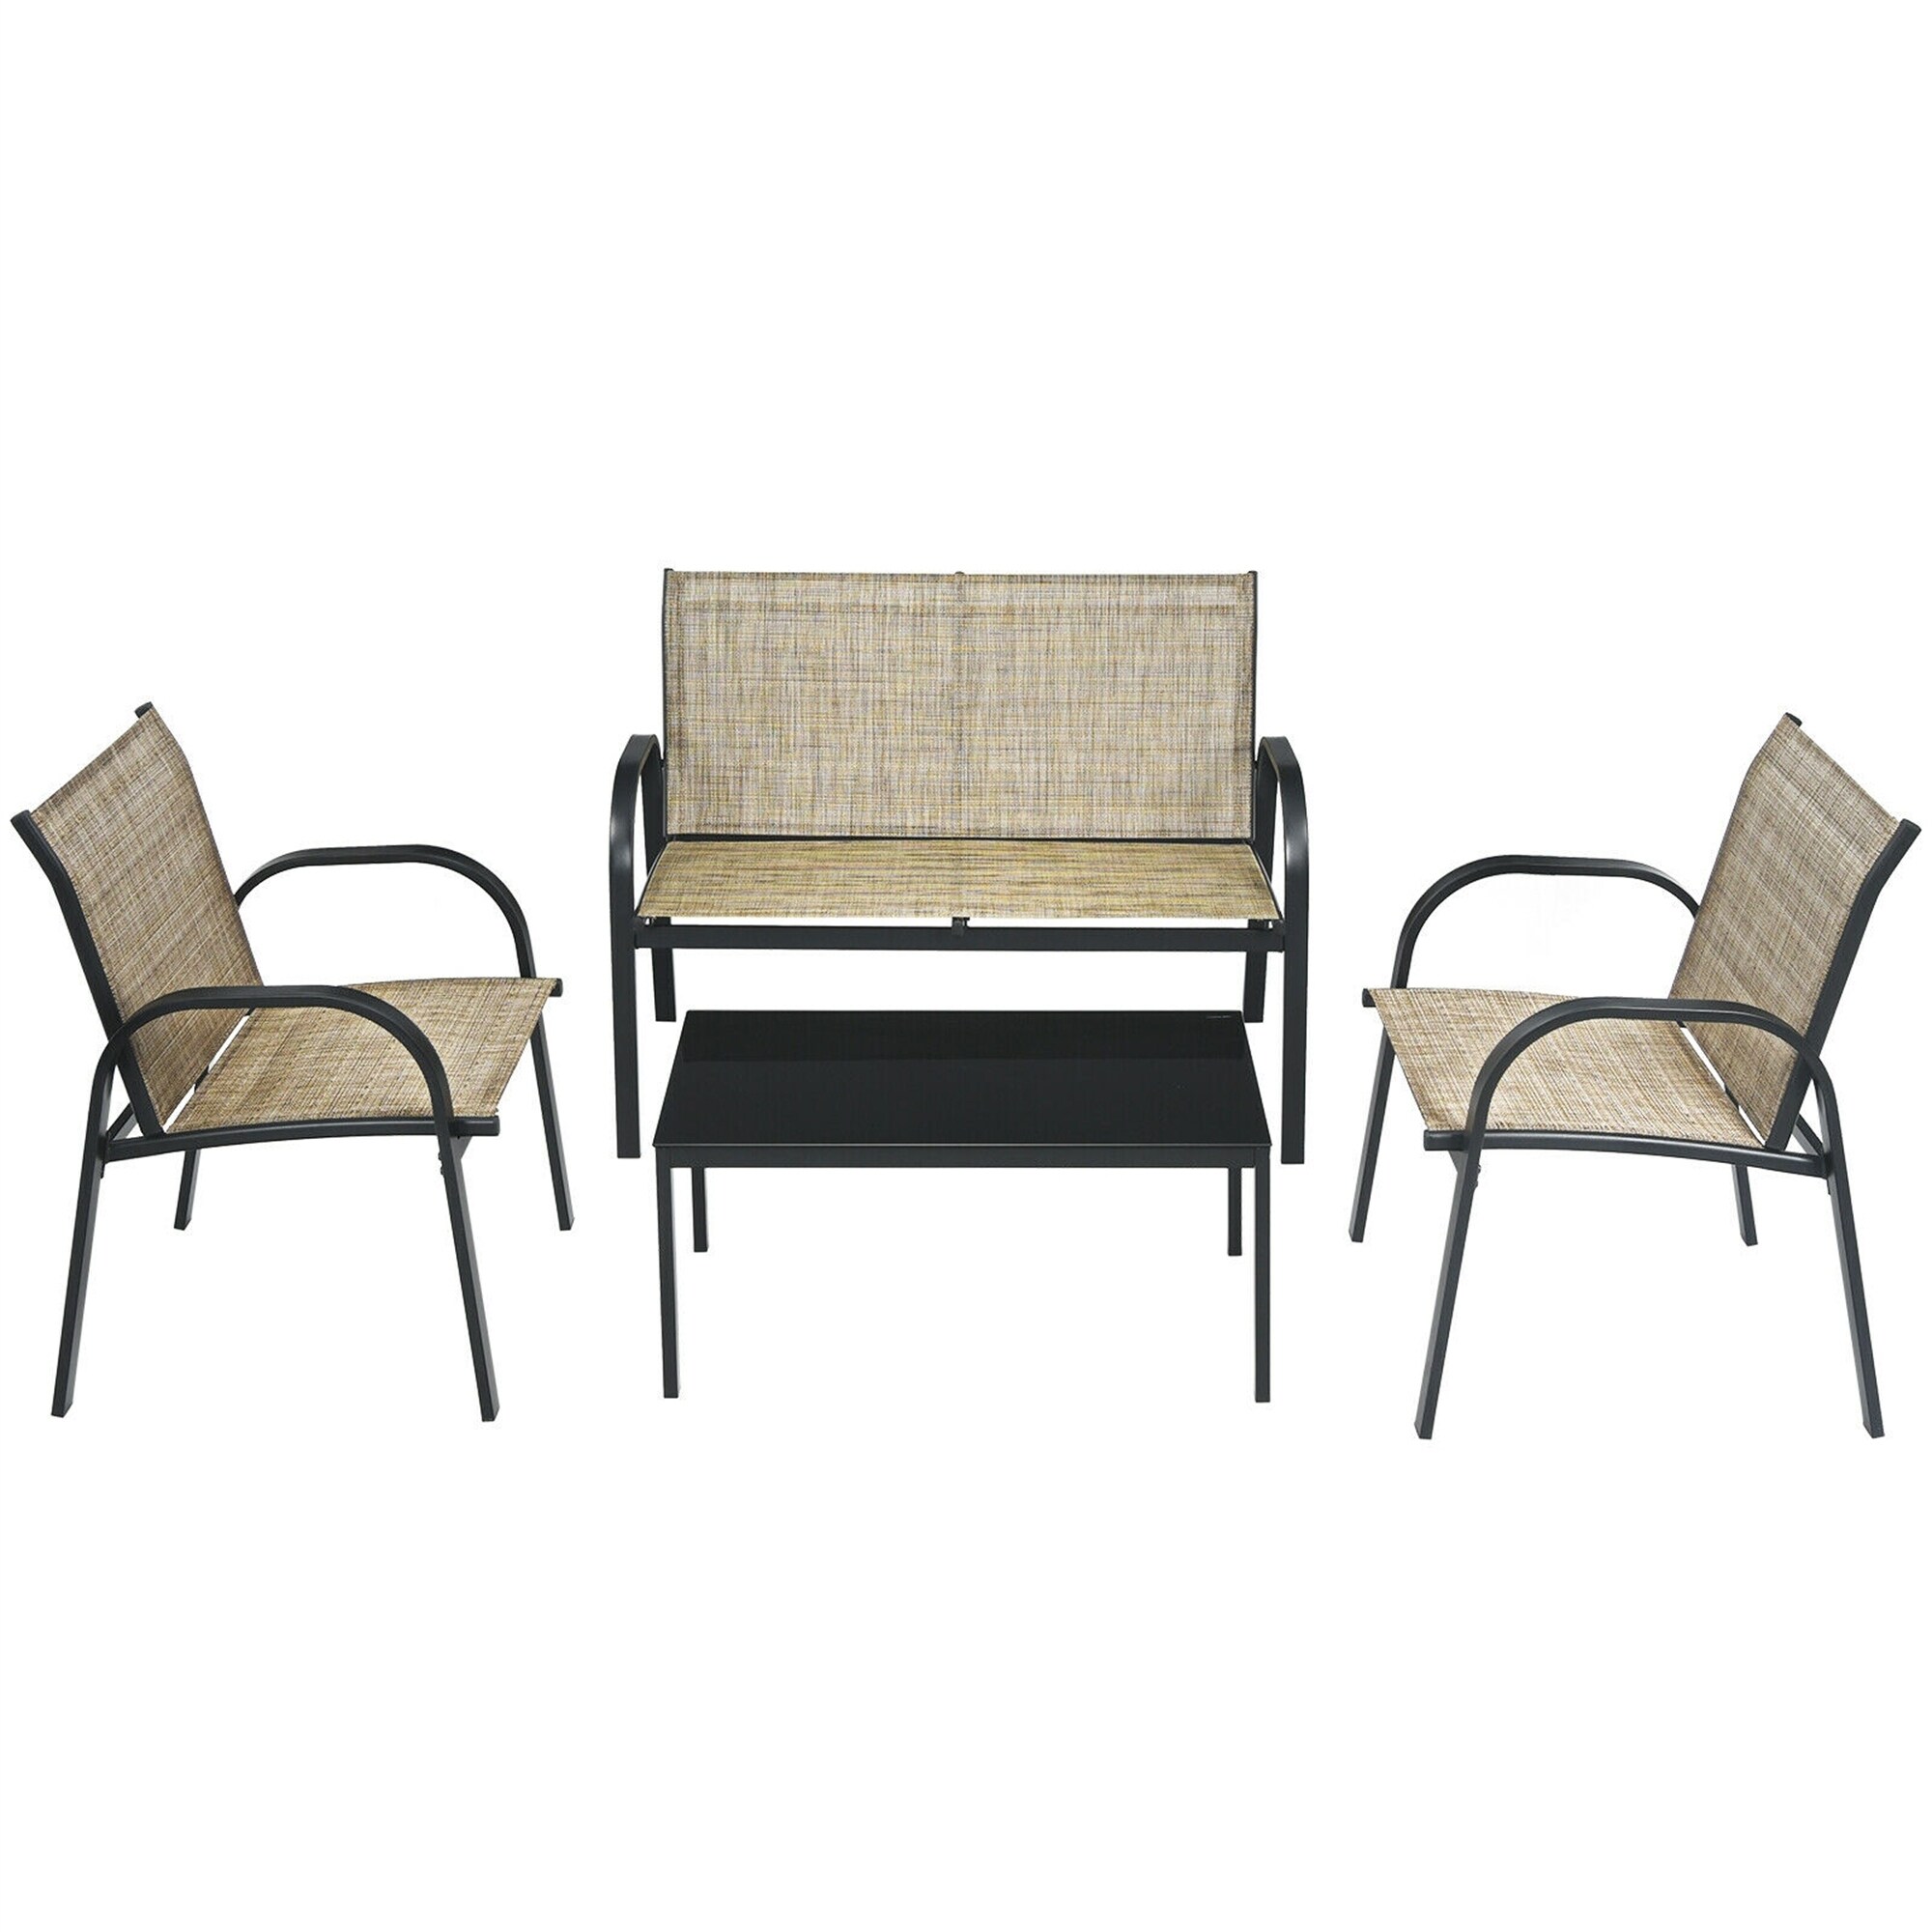 4pcs Patio Furniture Set Conversation Set With Glass Top Coffee Table